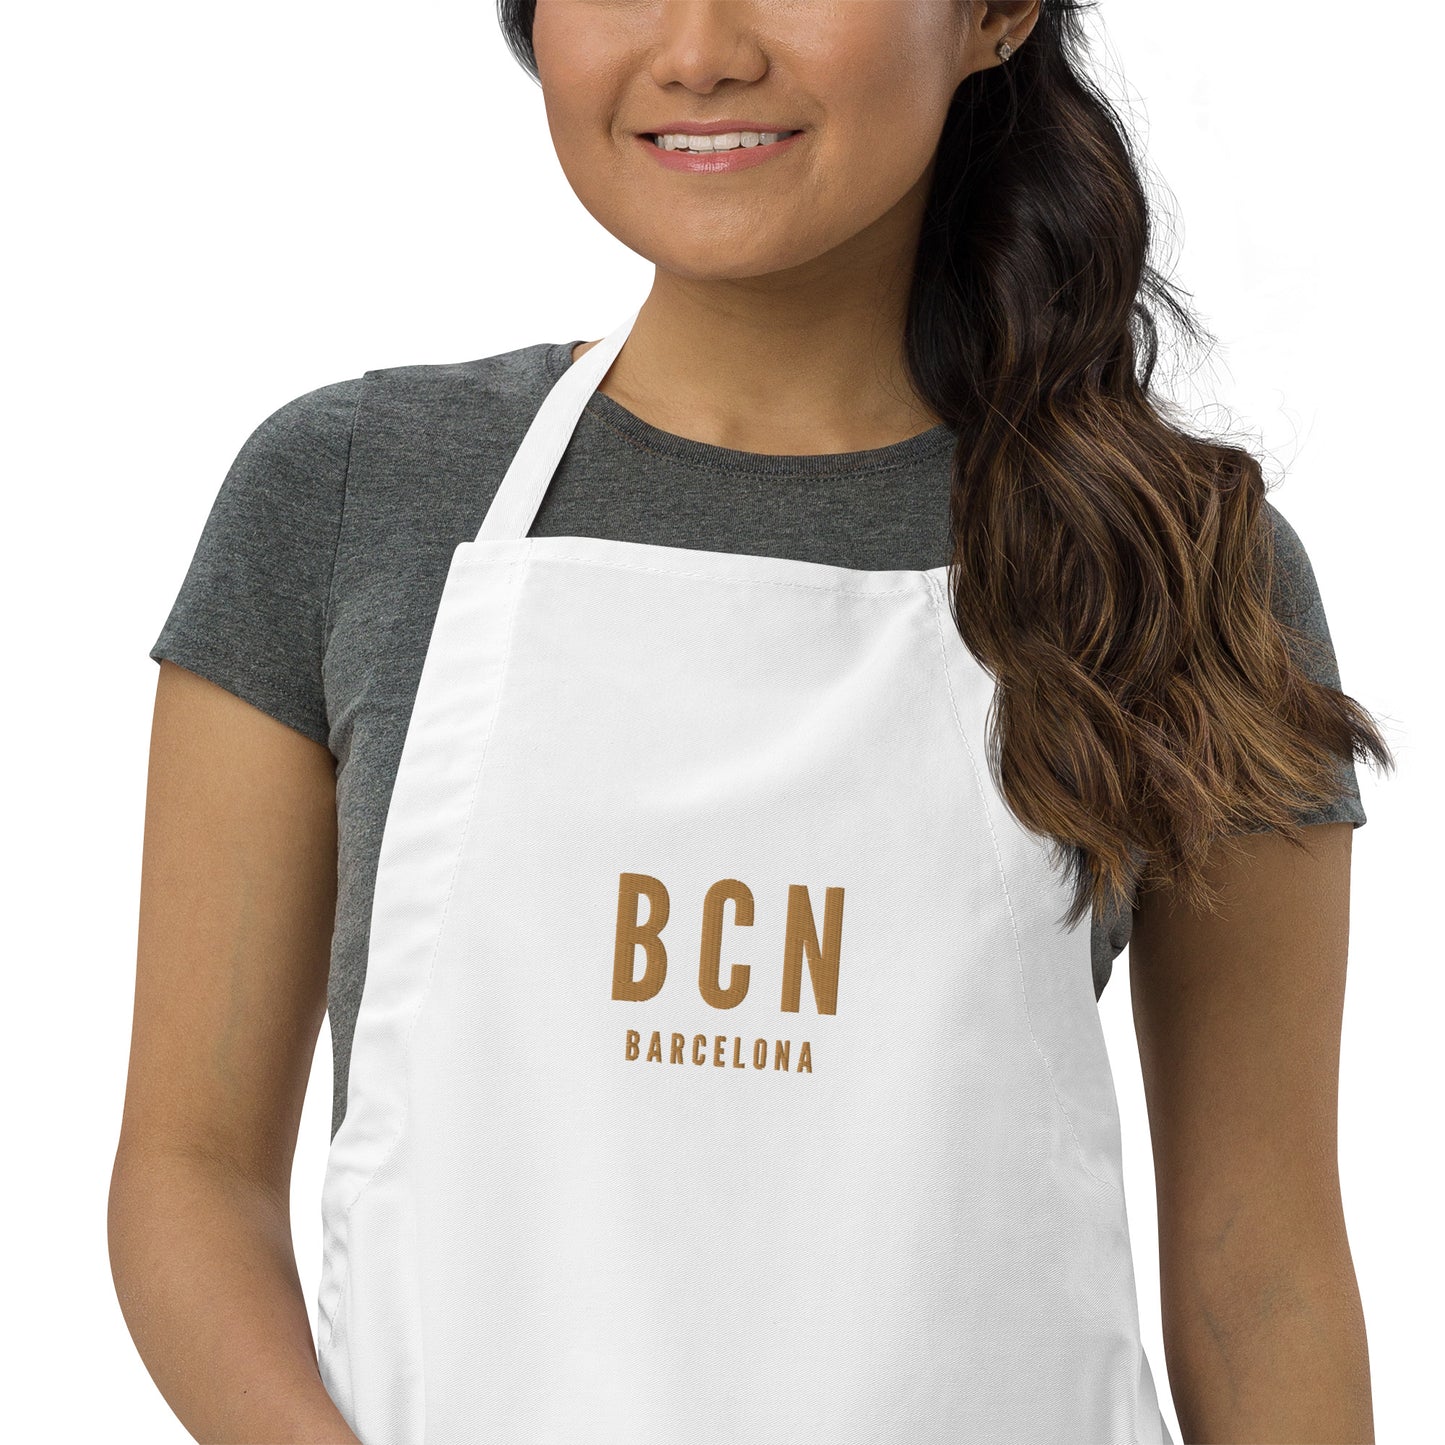 City Embroidered Apron - Old Gold • BCN Barcelona • YHM Designs - Image 08